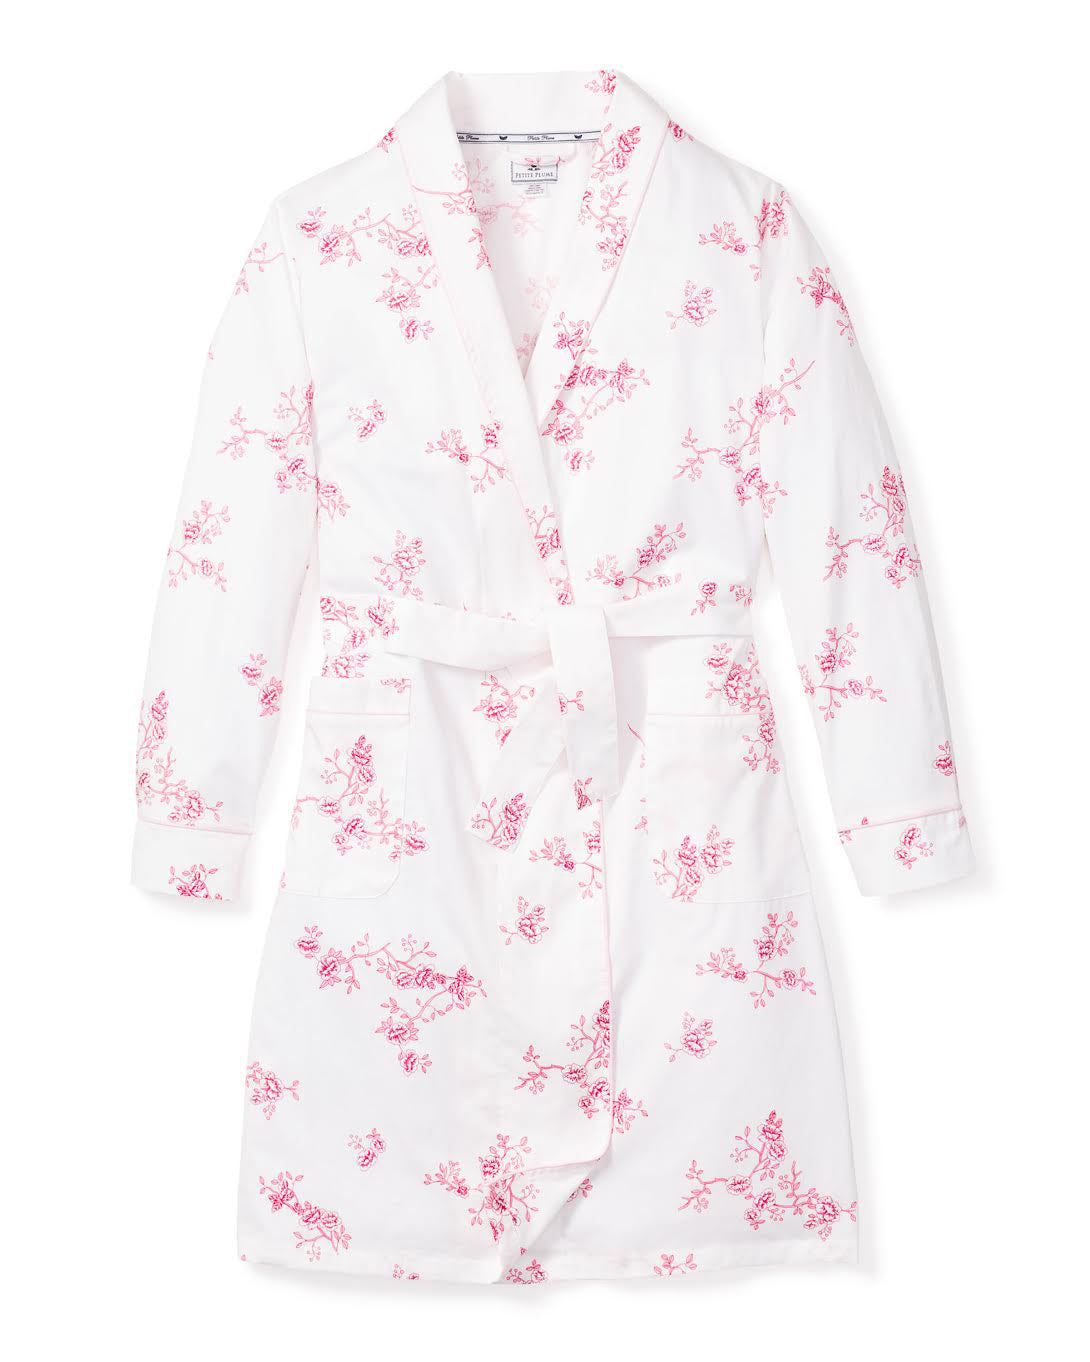 Women's Twill Robe in English Rose Floral